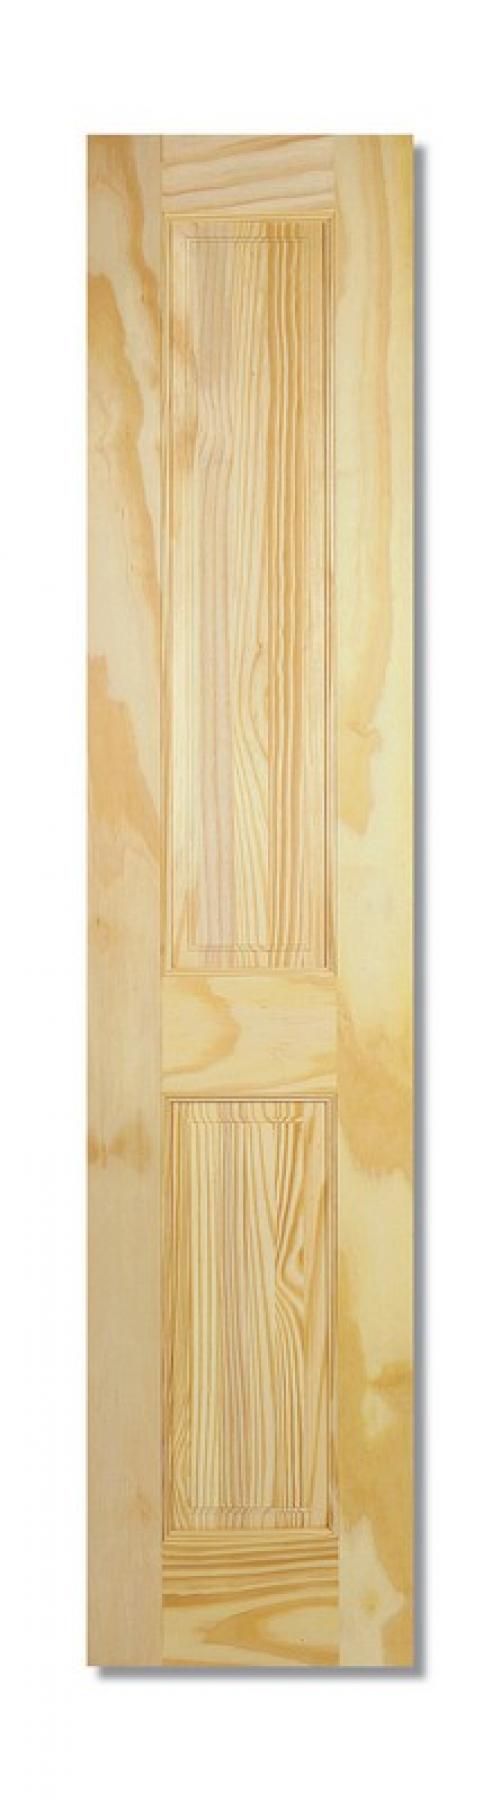 Image for 78X28 4 PANEL CLEAR PINE